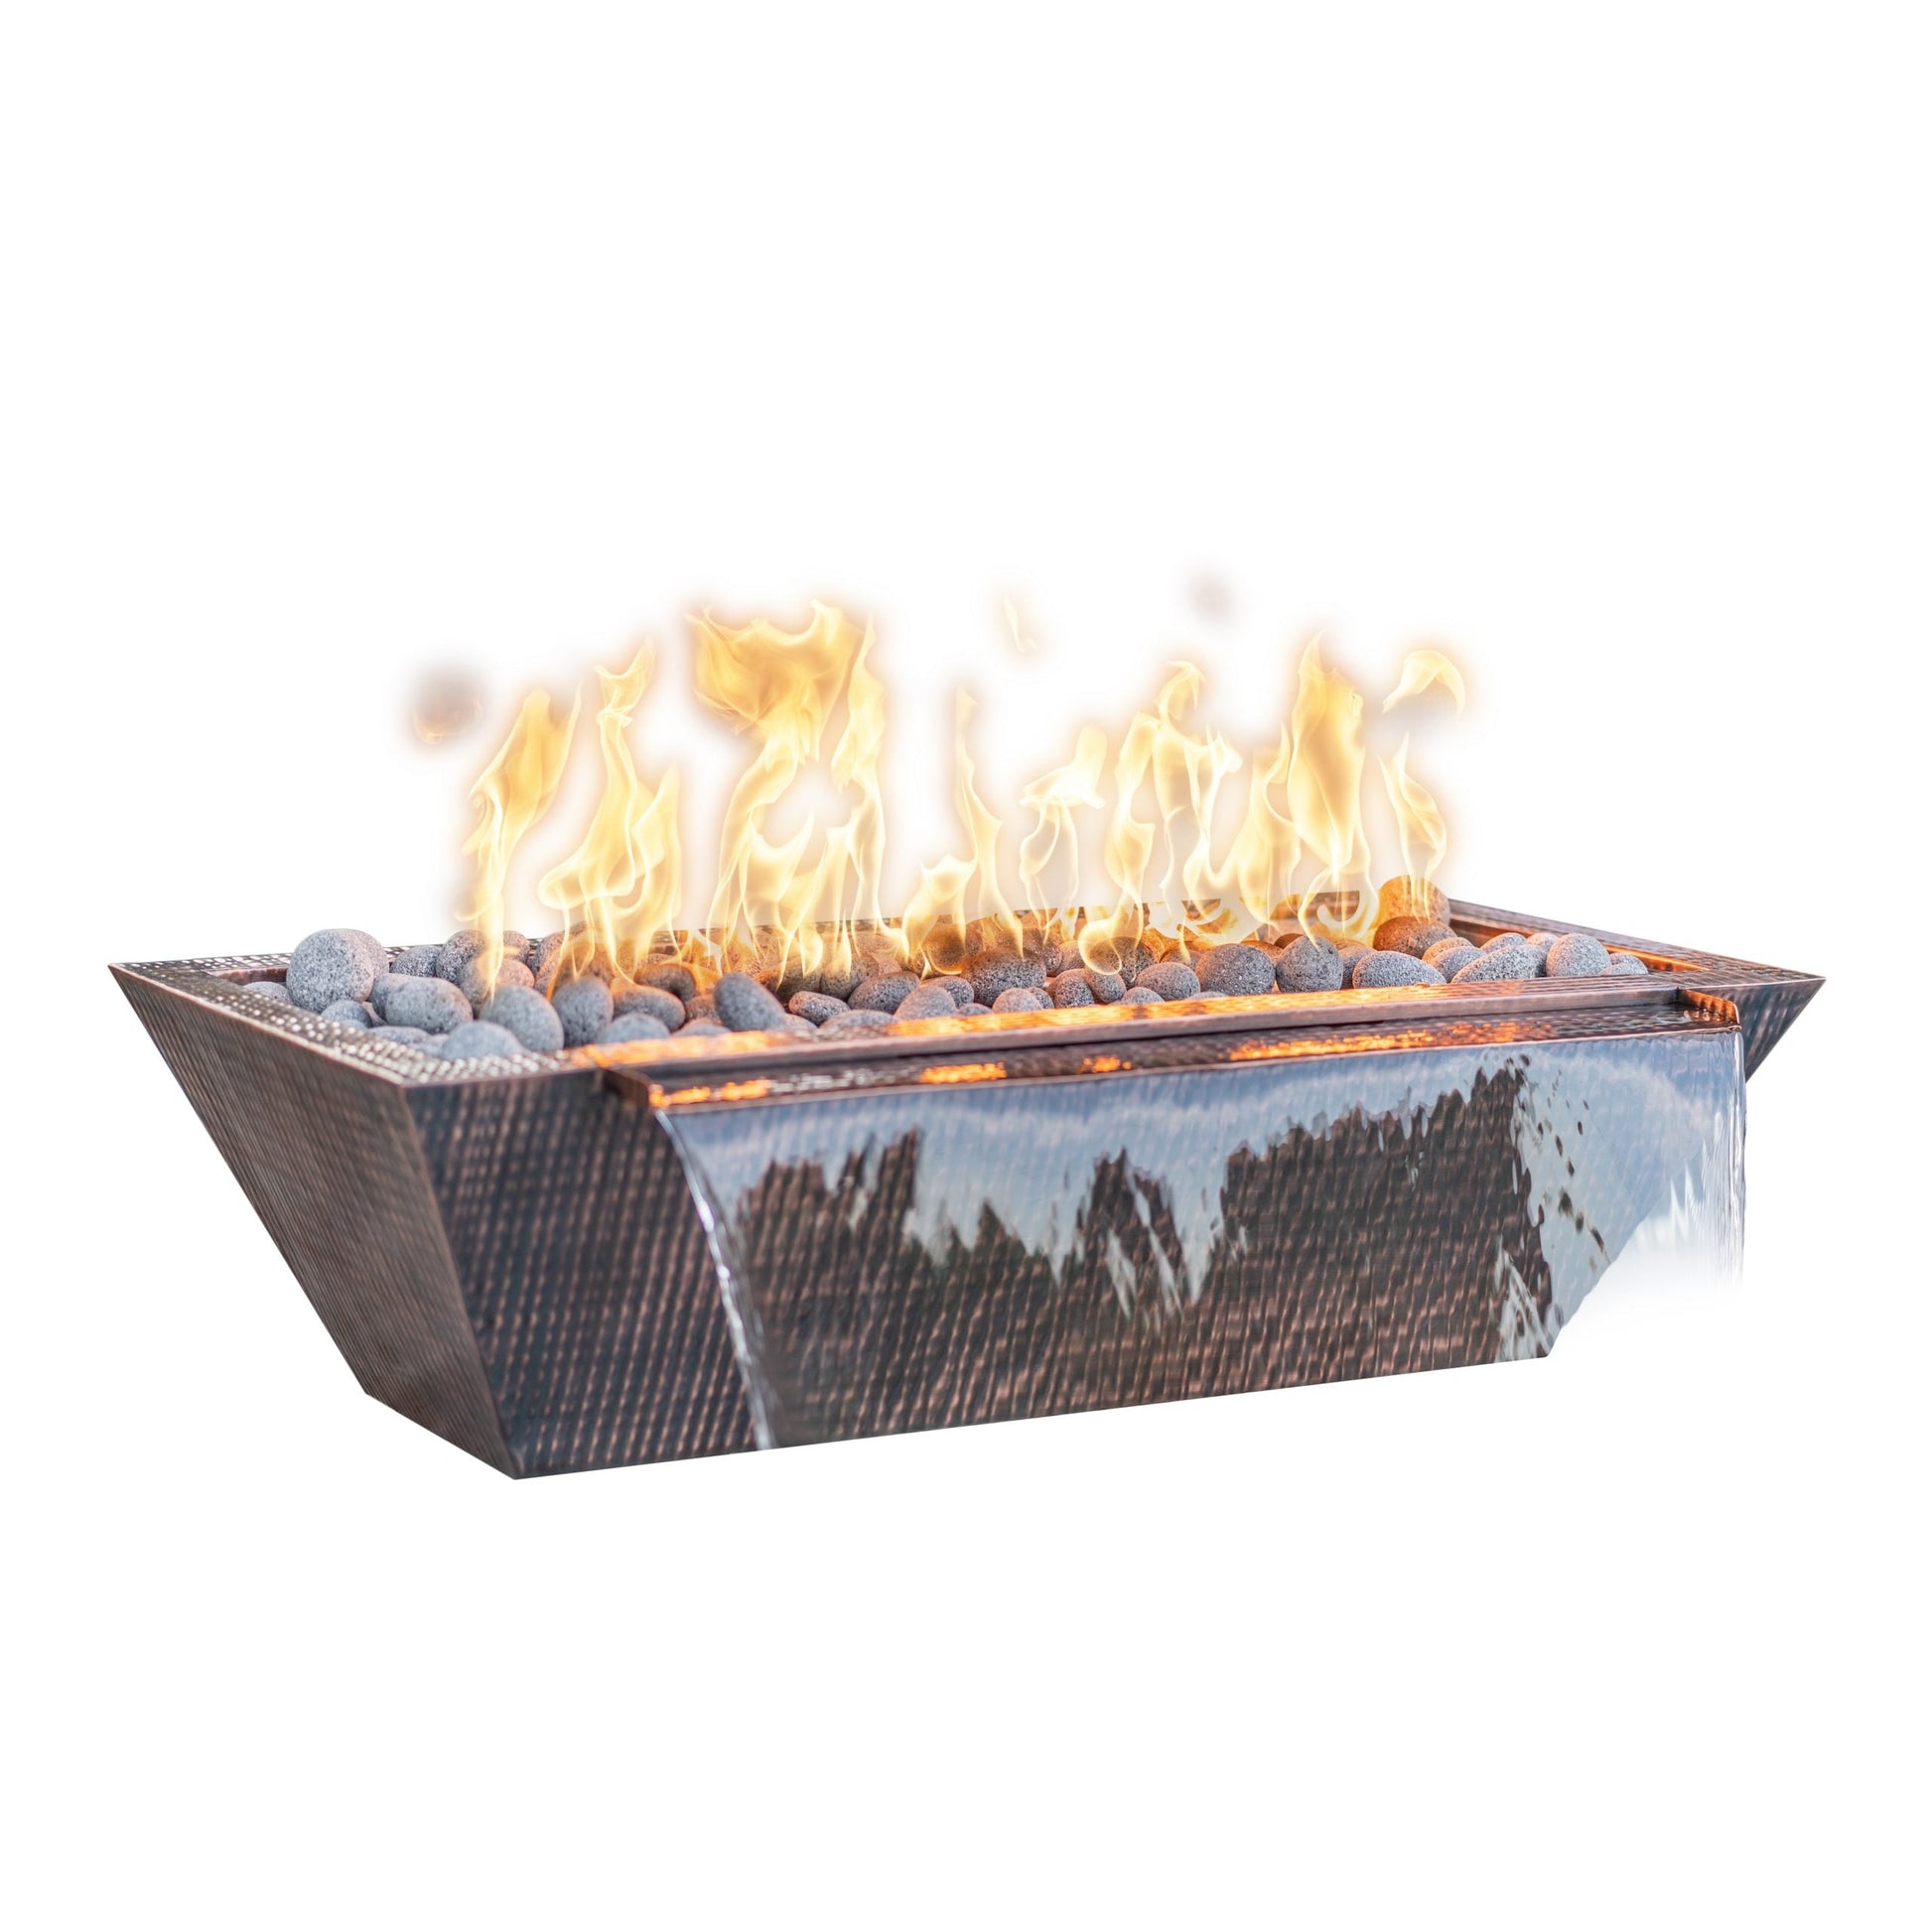 The Outdoor Plus Linear Maya 48" Stainless Steel Natural Gas Fire & Water Bowl with Match Lit with Flame Sense Ignition